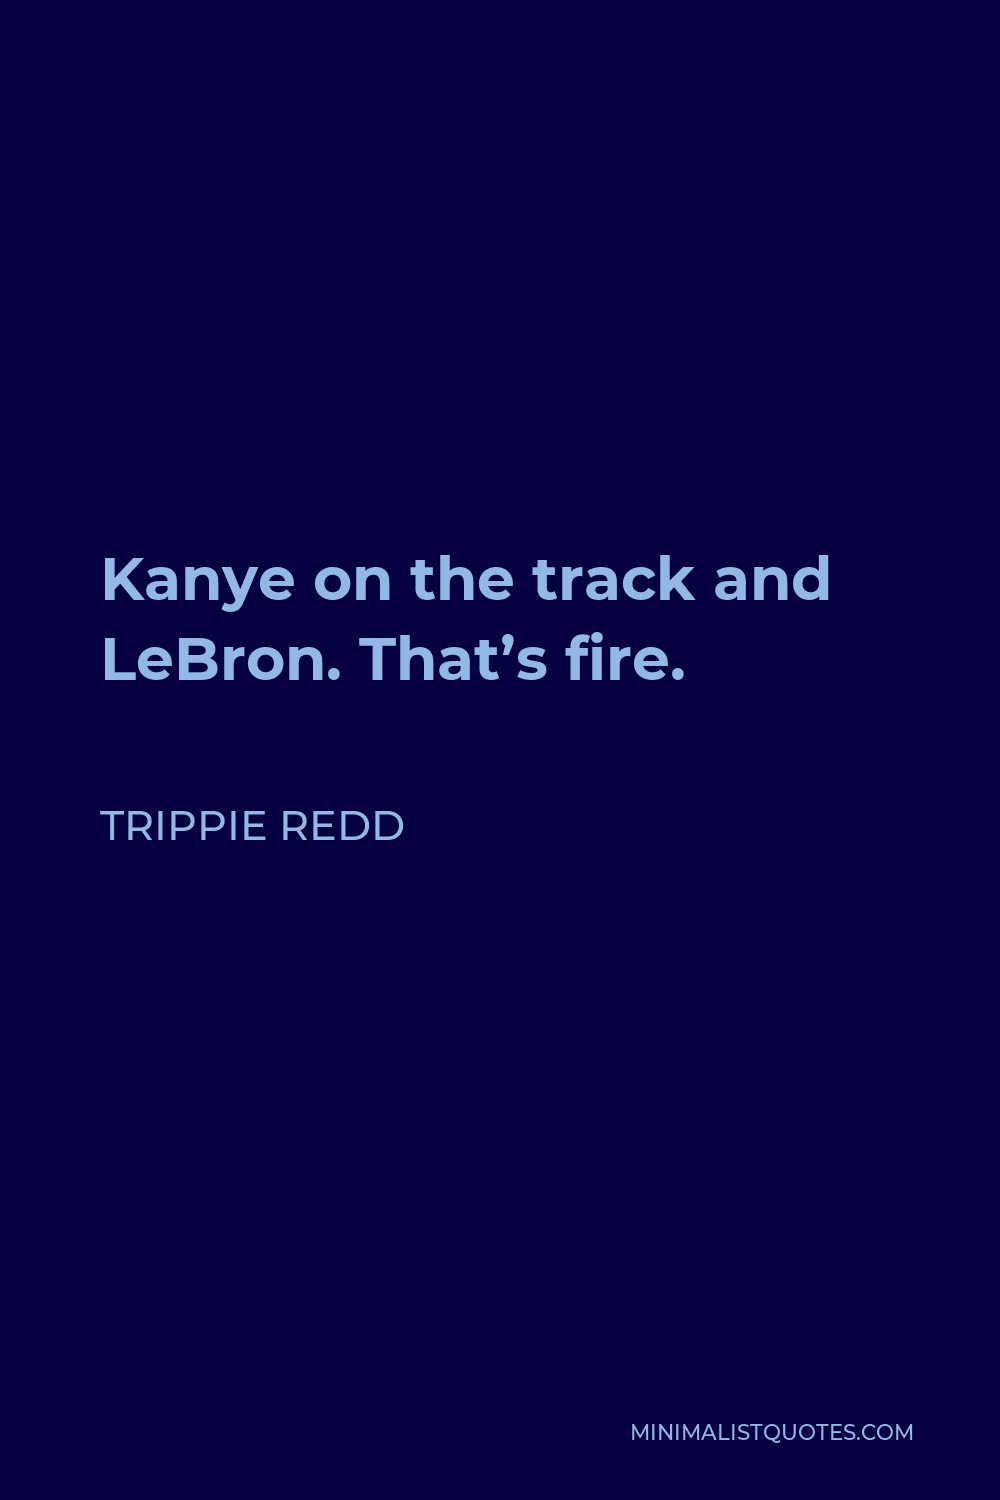 Trippie Redd Quote - Kanye on the track and LeBron. That’s fire.